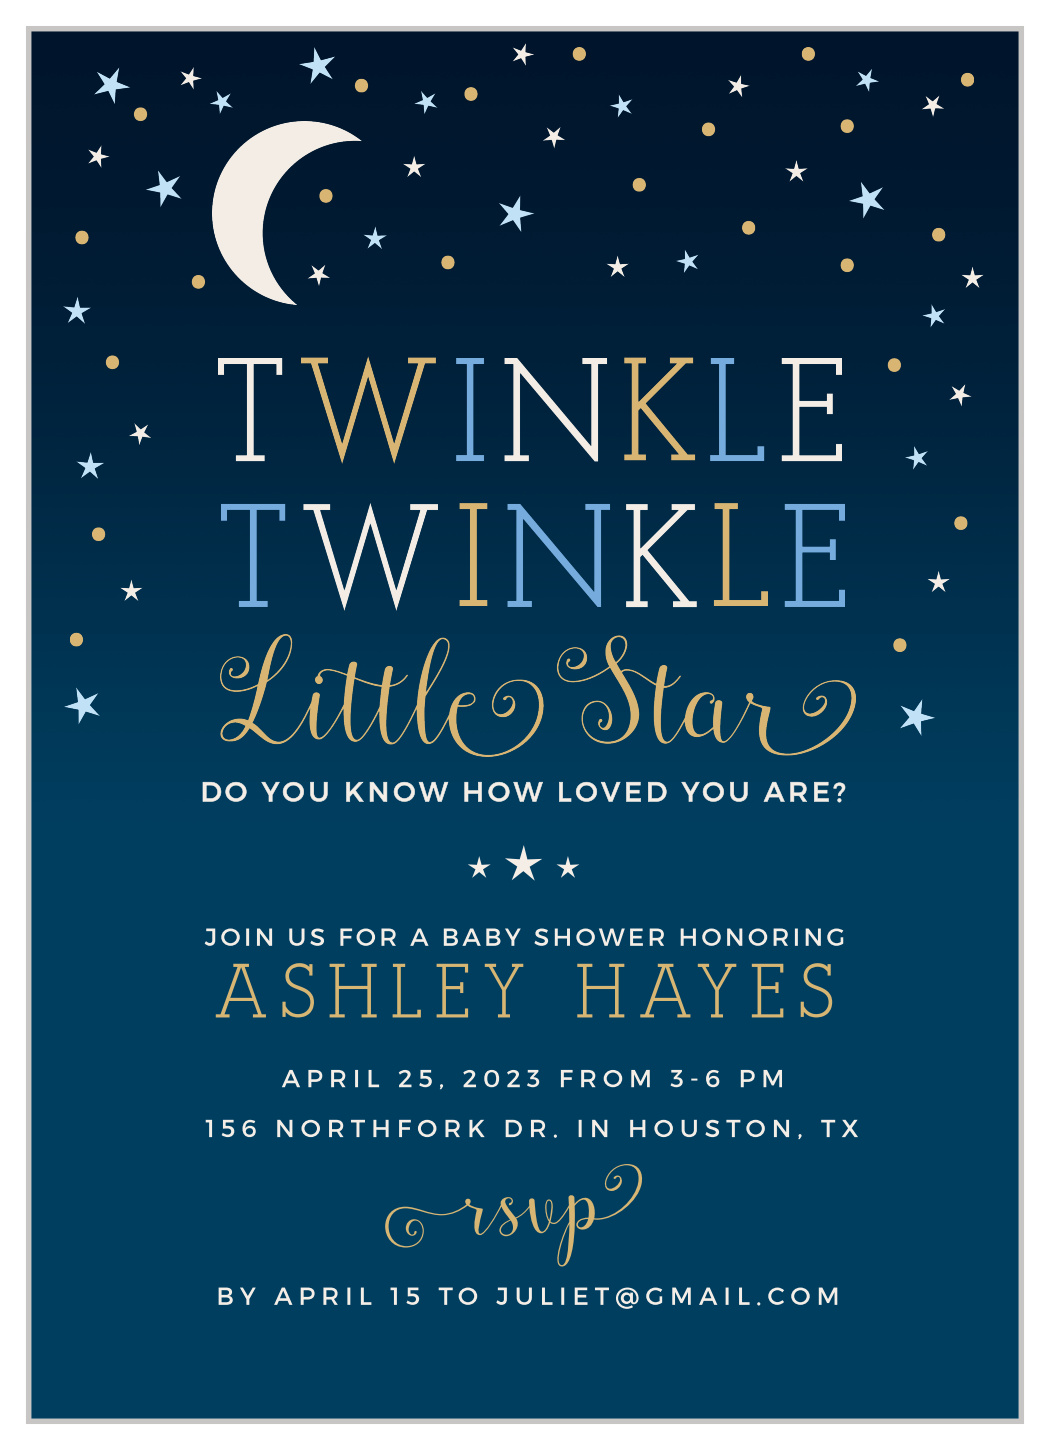 Twinkle Twinkle Little Star Baby Shower Invitations Free | lupon.gov.ph